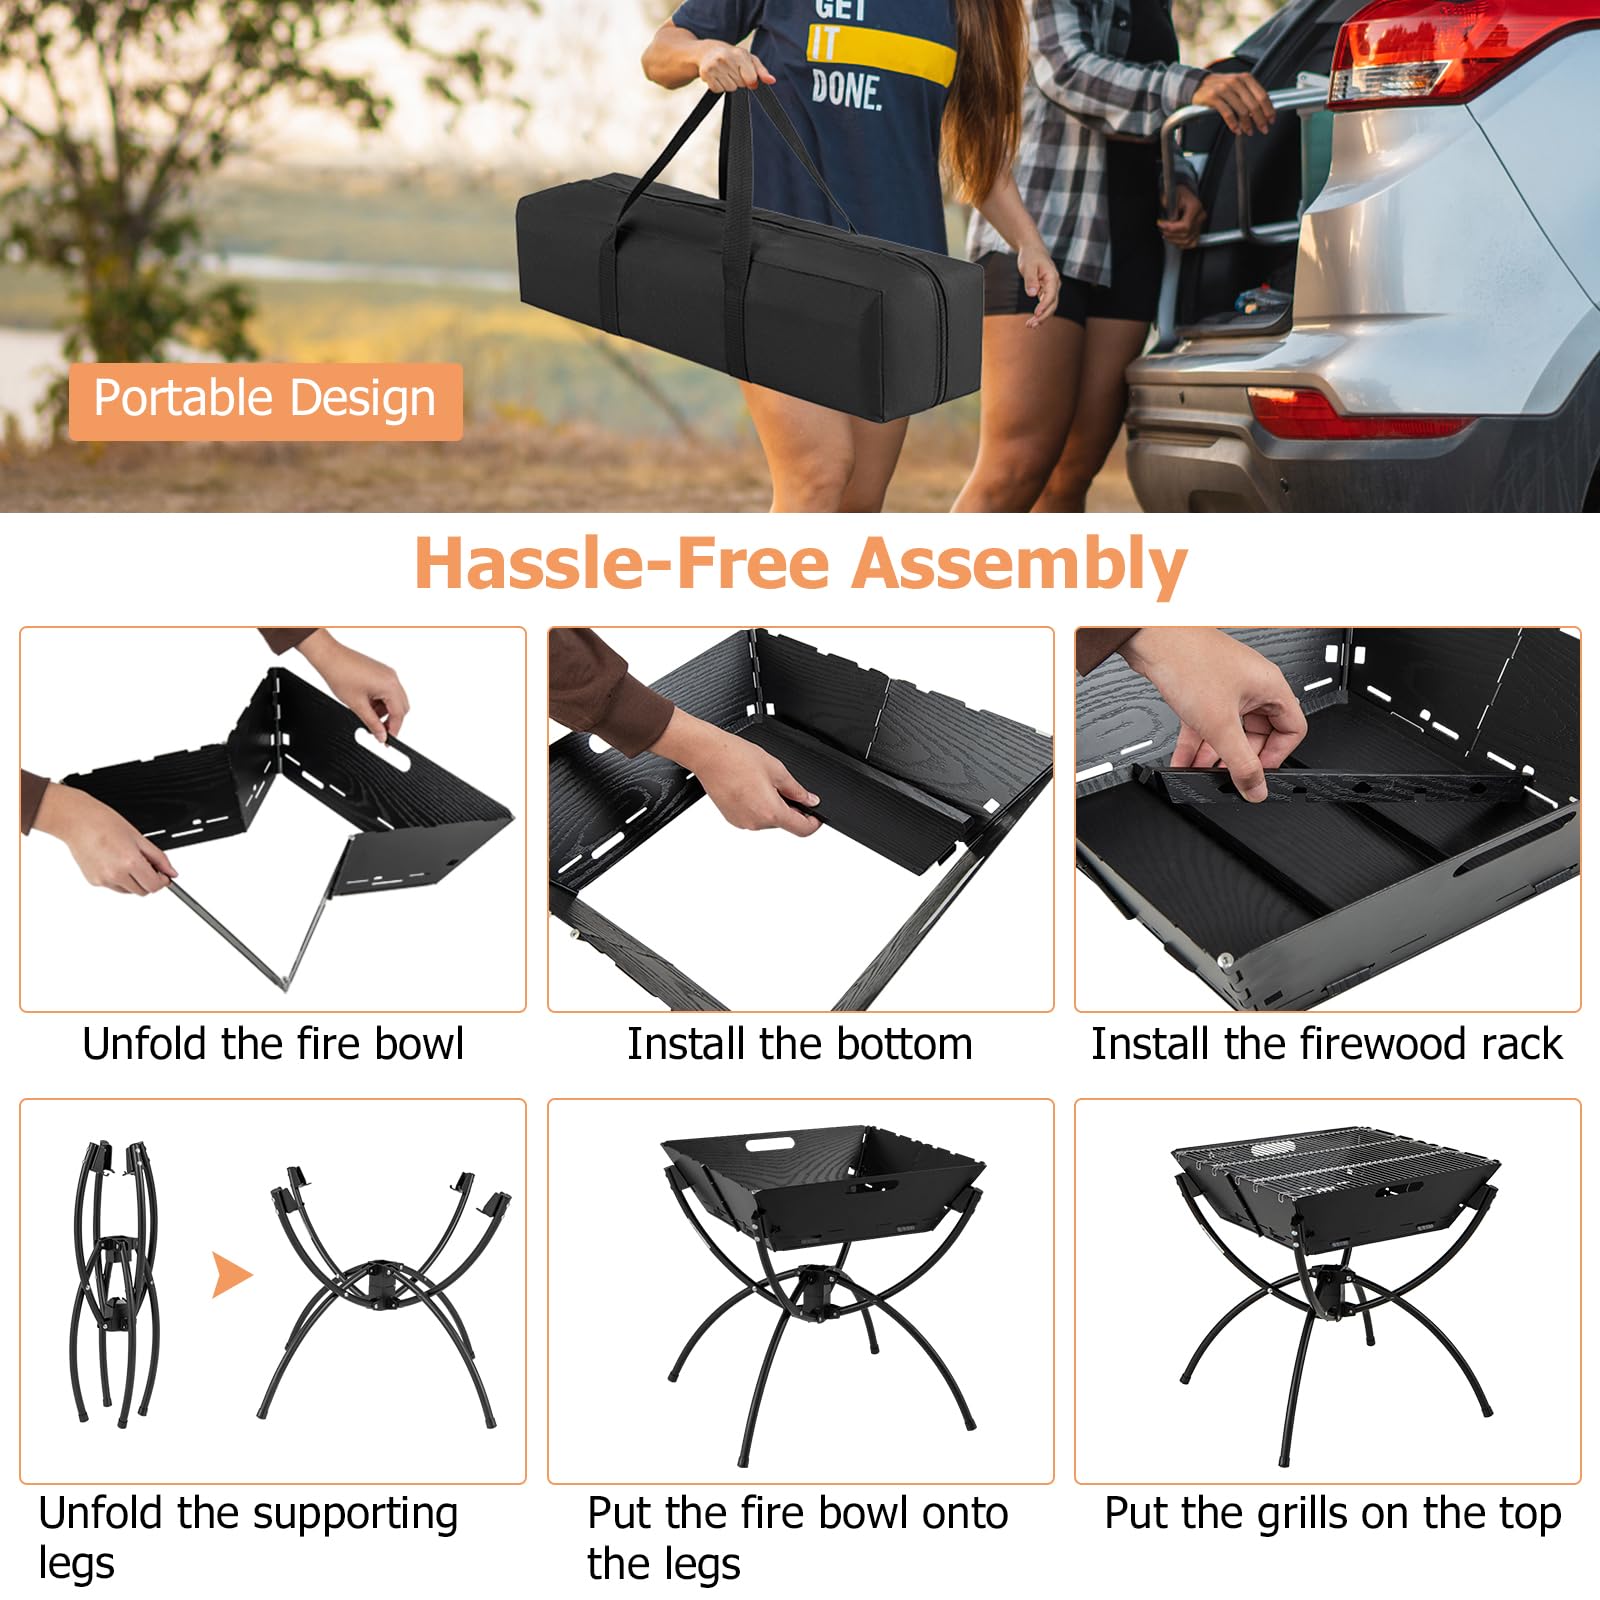 Giantex Folding Campfire Grill, Camping Fire Pit with Stainless Steel Grates, Collapsible Aluminum Legs, Carry Bag